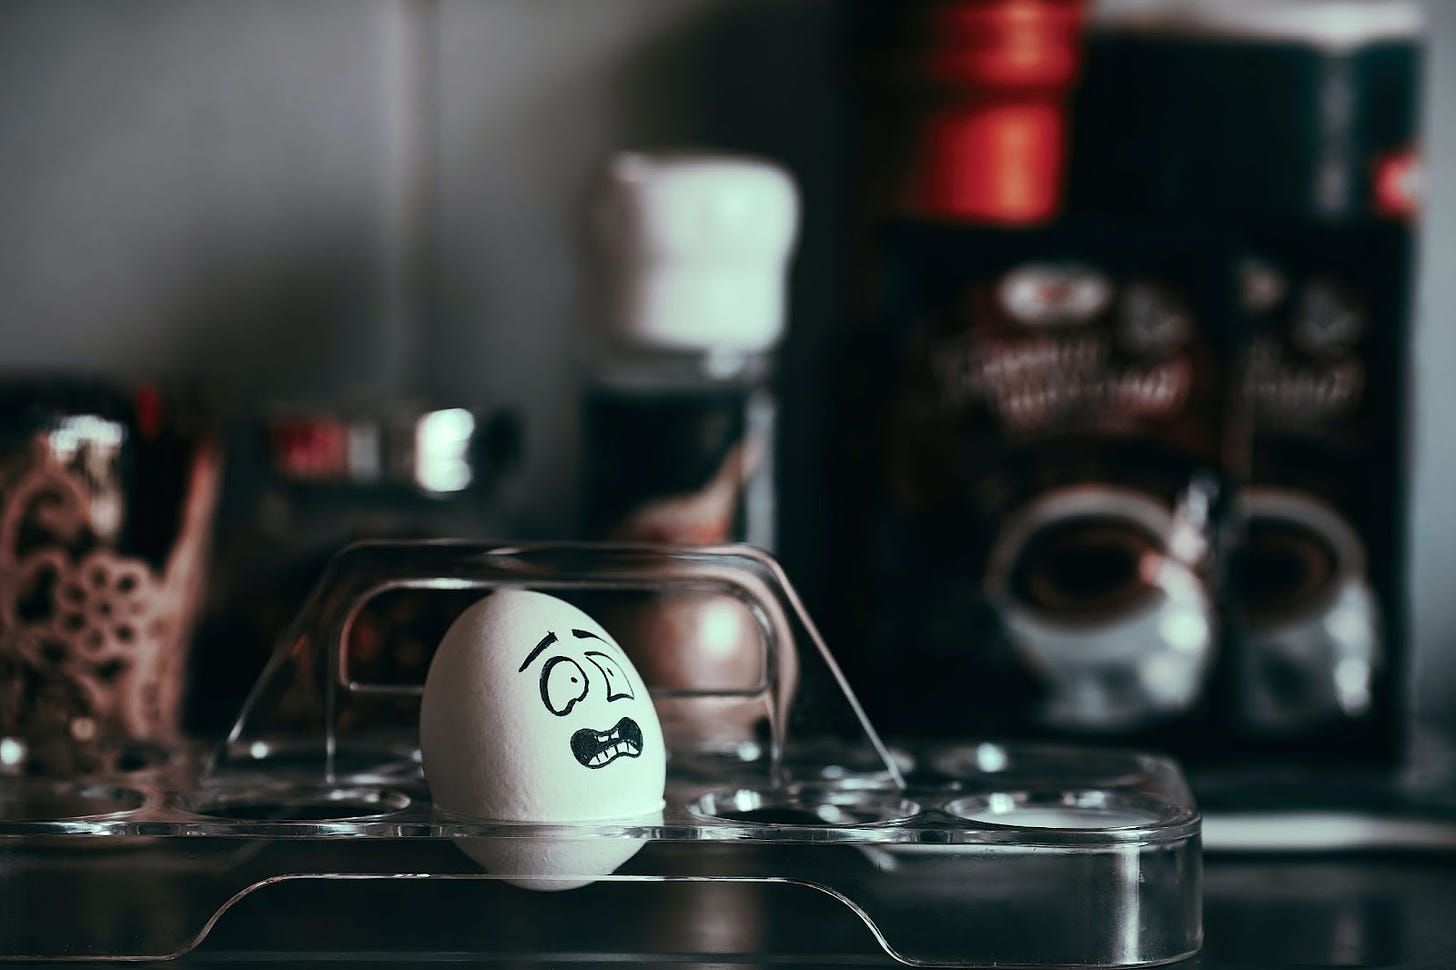 An anxious-looking face is painted on an egg.